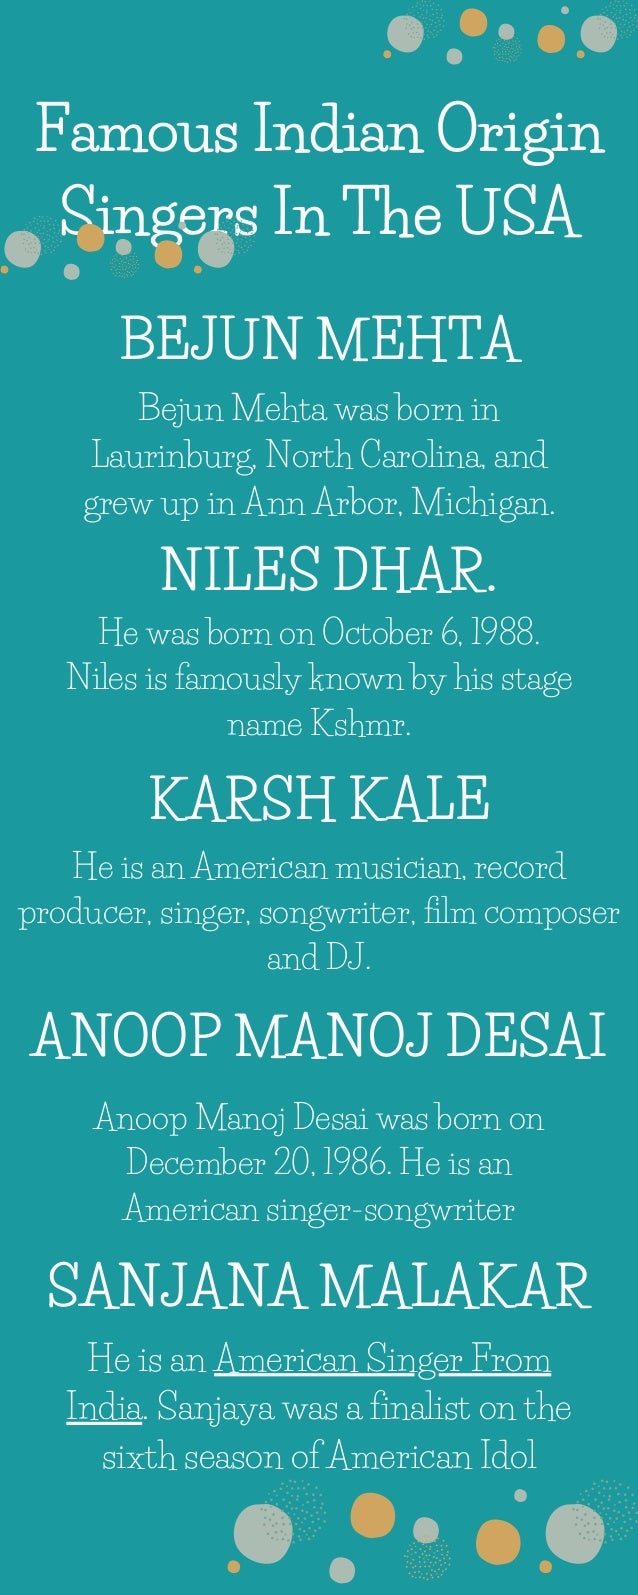 Famous Indian Origin
Singers In The USA
BEJUN MEHTA
NILES DHAR.
KARSH KALE
ANOOP MANOJ DESAI
SANJANA MALAKAR
Bejun Mehta was born in
Laurinburg, North Carolina, and
grew up in Ann Arbor, Michigan.
He was born on October 6, 1988.
Niles is famously known by his stage
name Kshmr.
He is an American musician, record
producer, singer, songwriter, film composer
and DJ.
Anoop Manoj Desai was born on
December 20, 1986. He is an
American singer-songwriter
He is an American Singer From
India. Sanjaya was a finalist on the
sixth season of American Idol
 